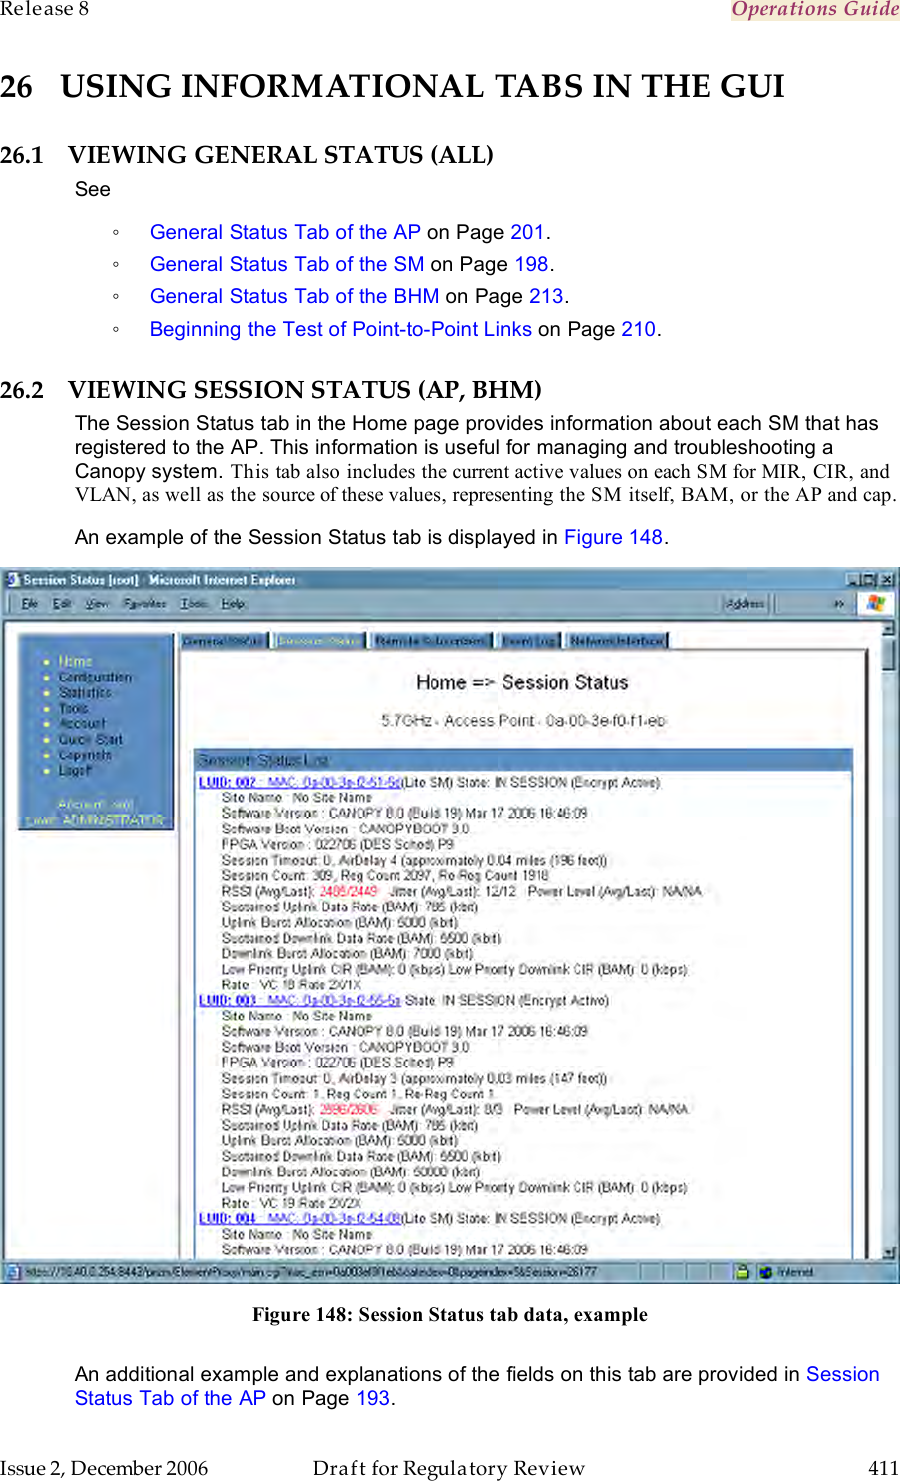 Release 8    Operations Guide   Issue 2, December 2006  Draft for Regulatory Review  411     26 USING INFORMATIONAL TABS IN THE GUI 26.1 VIEWING GENERAL STATUS (ALL) See ◦ General Status Tab of the AP on Page 201. ◦ General Status Tab of the SM on Page 198. ◦ General Status Tab of the BHM on Page 213. ◦ Beginning the Test of Point-to-Point Links on Page 210. 26.2 VIEWING SESSION STATUS (AP, BHM) The Session Status tab in the Home page provides information about each SM that has registered to the AP. This information is useful for managing and troubleshooting a Canopy system. This tab also includes the current active values on each SM for MIR, CIR, and VLAN, as well as the source of these values, representing the SM itself, BAM, or the AP and cap. An example of the Session Status tab is displayed in Figure 148.   Figure 148: Session Status tab data, example  An additional example and explanations of the fields on this tab are provided in Session Status Tab of the AP on Page 193. 